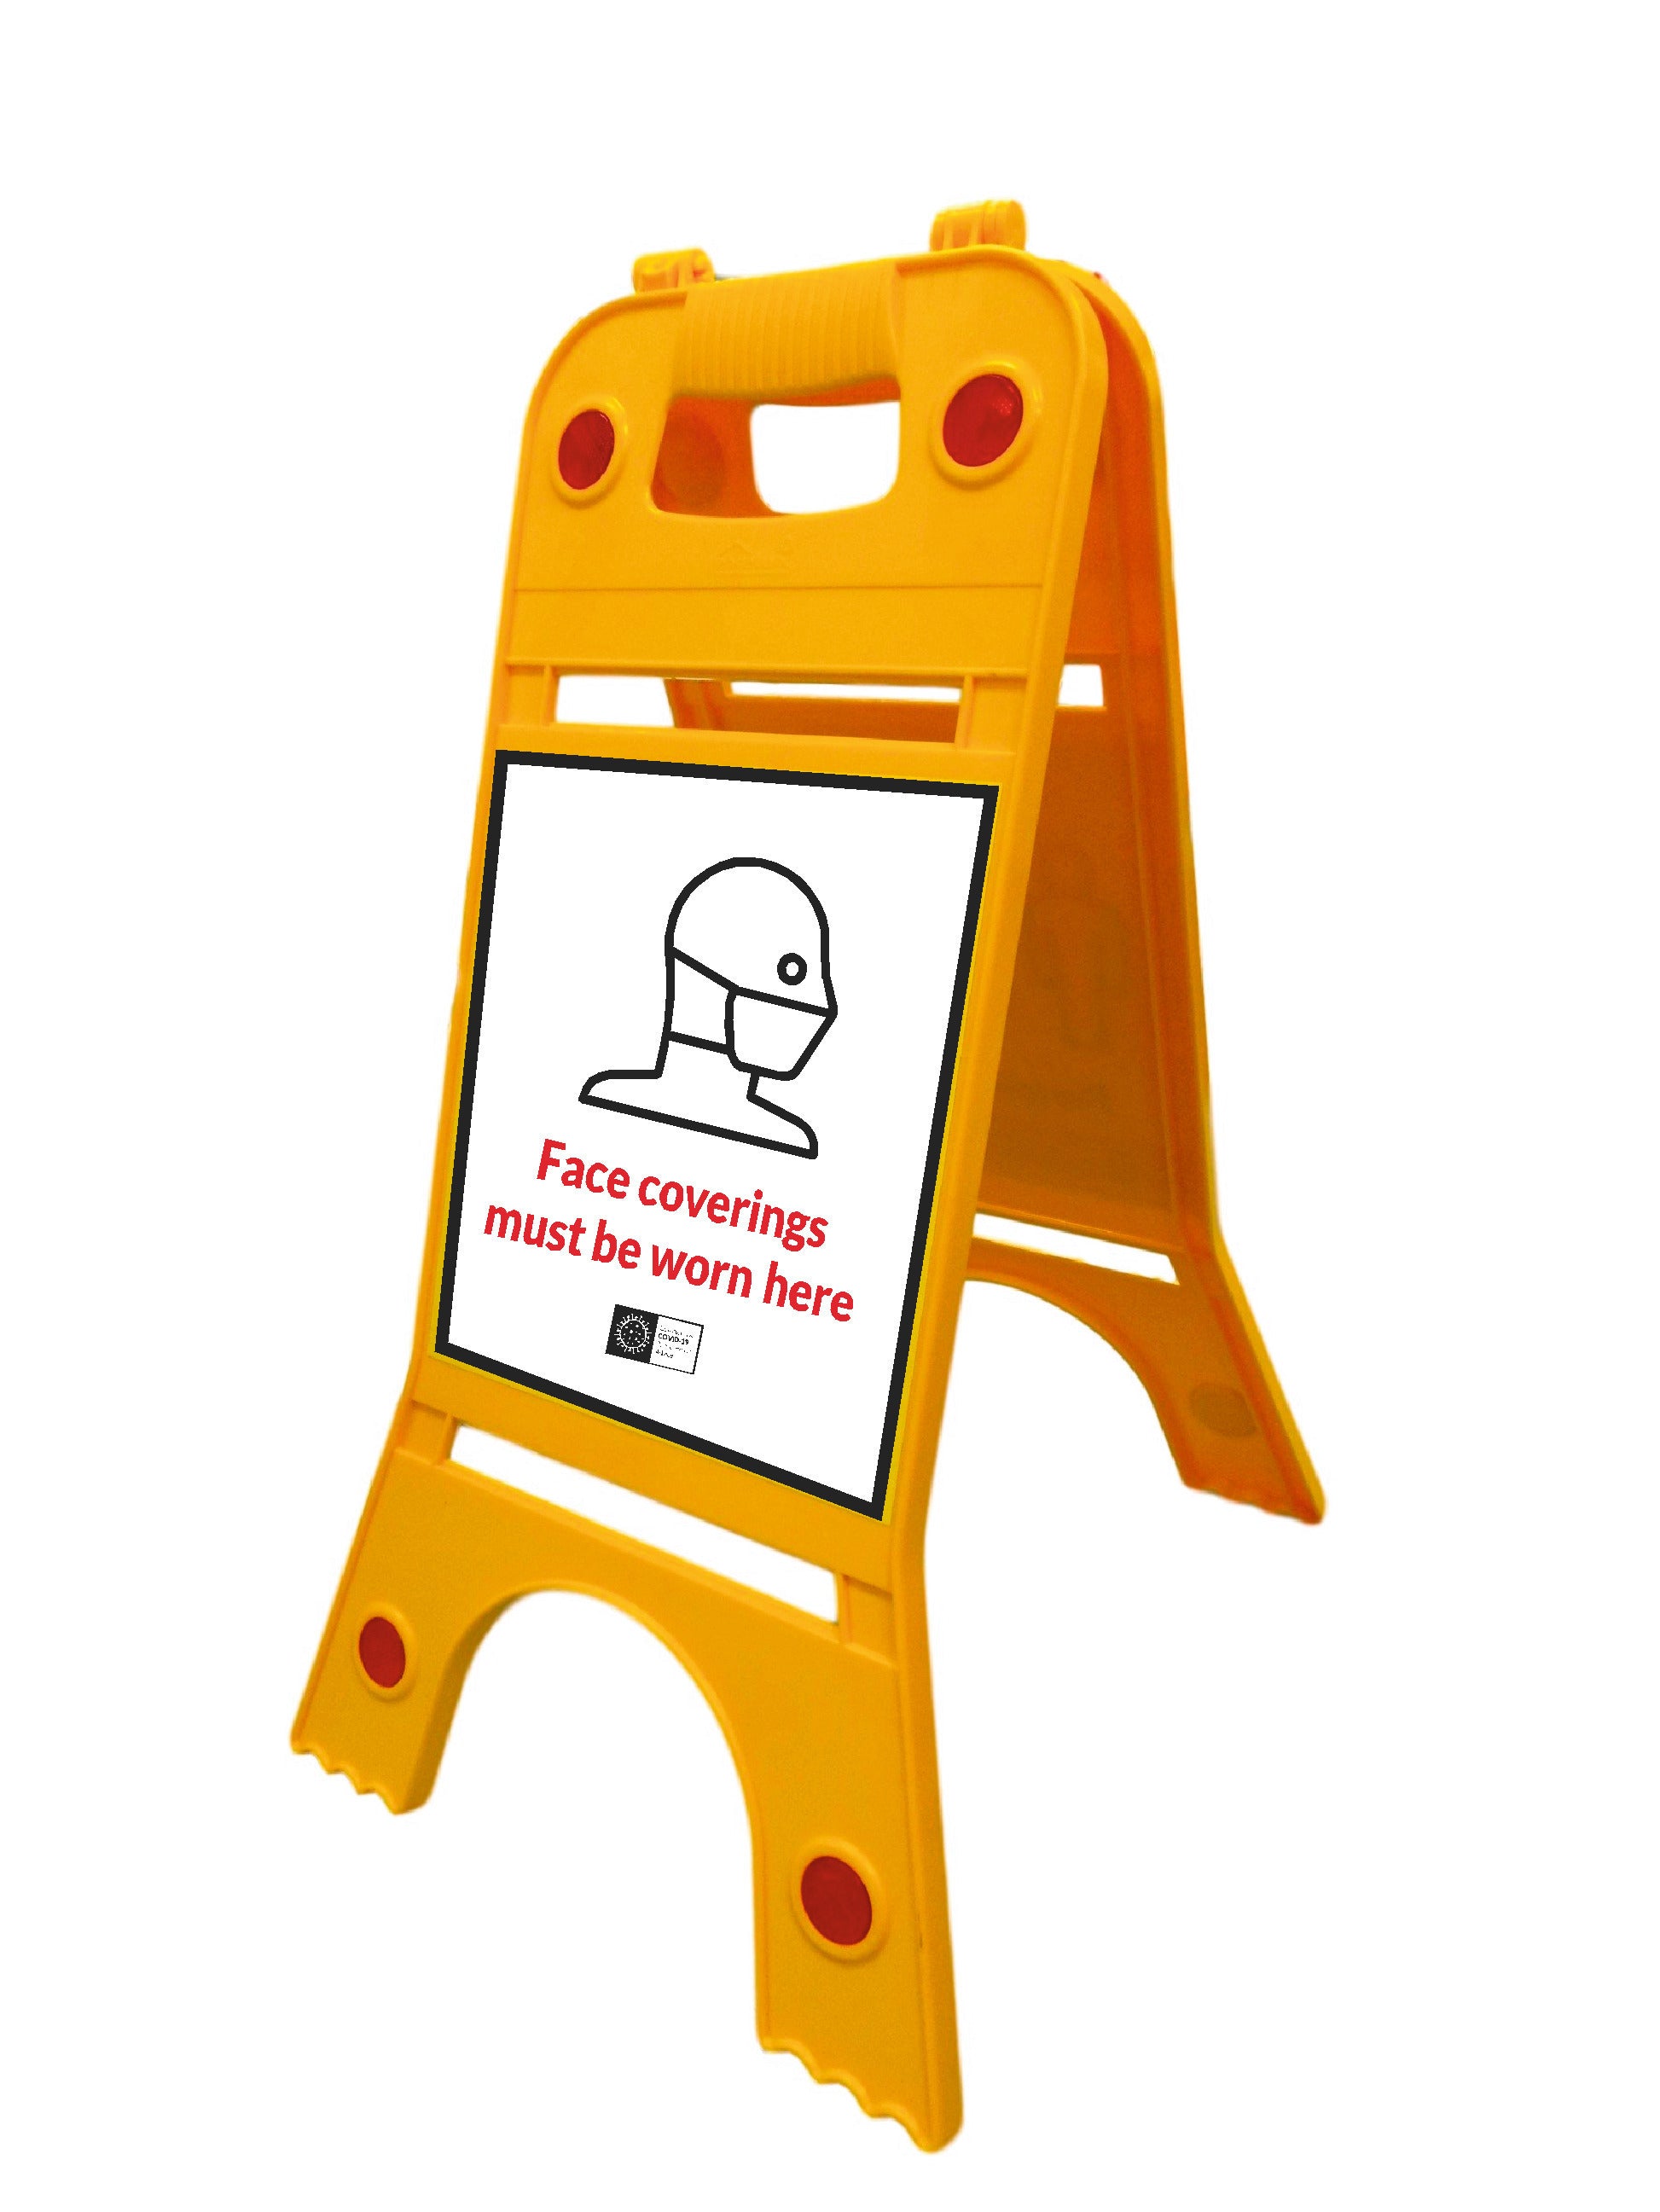 A-Frame Face Coverings Must Be Worn Floor Safety Sign